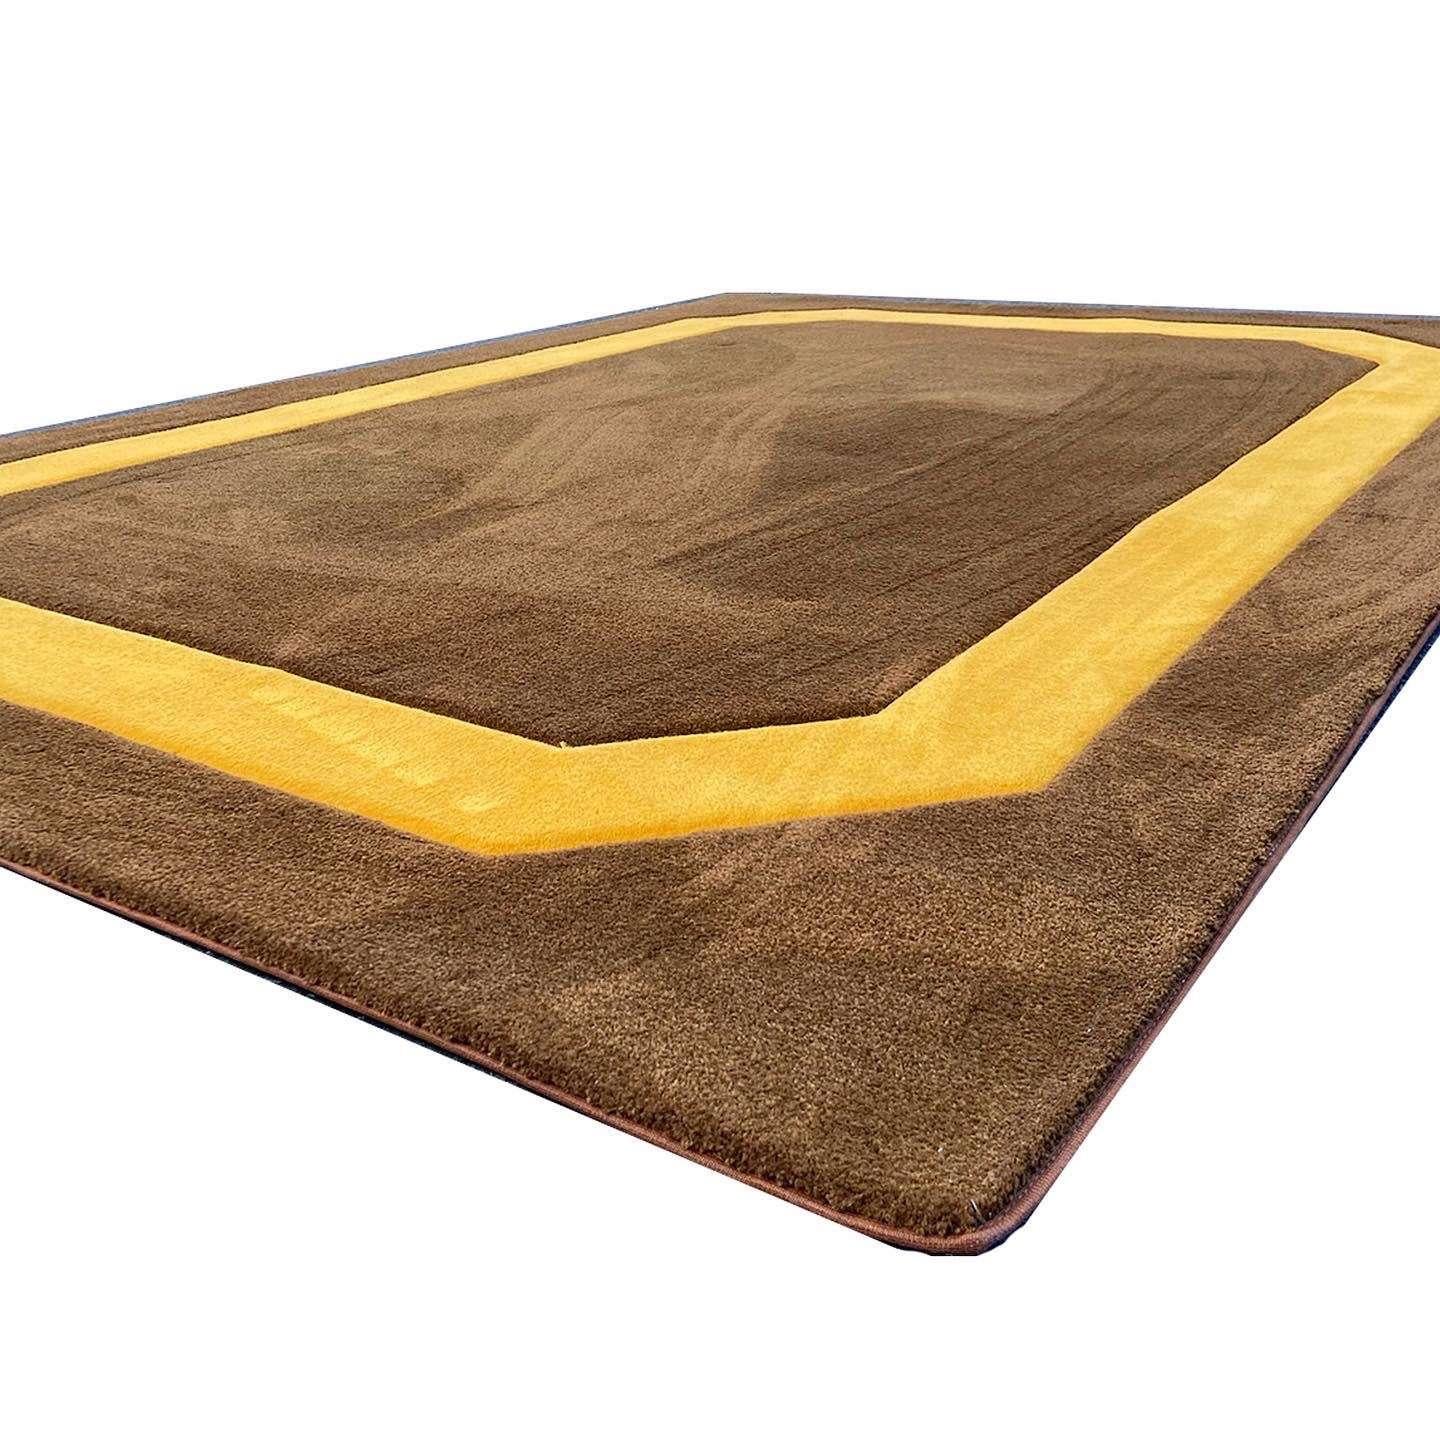 Late 20th Century Postmodern Brown and Orange Rectangular Area Rug For Sale